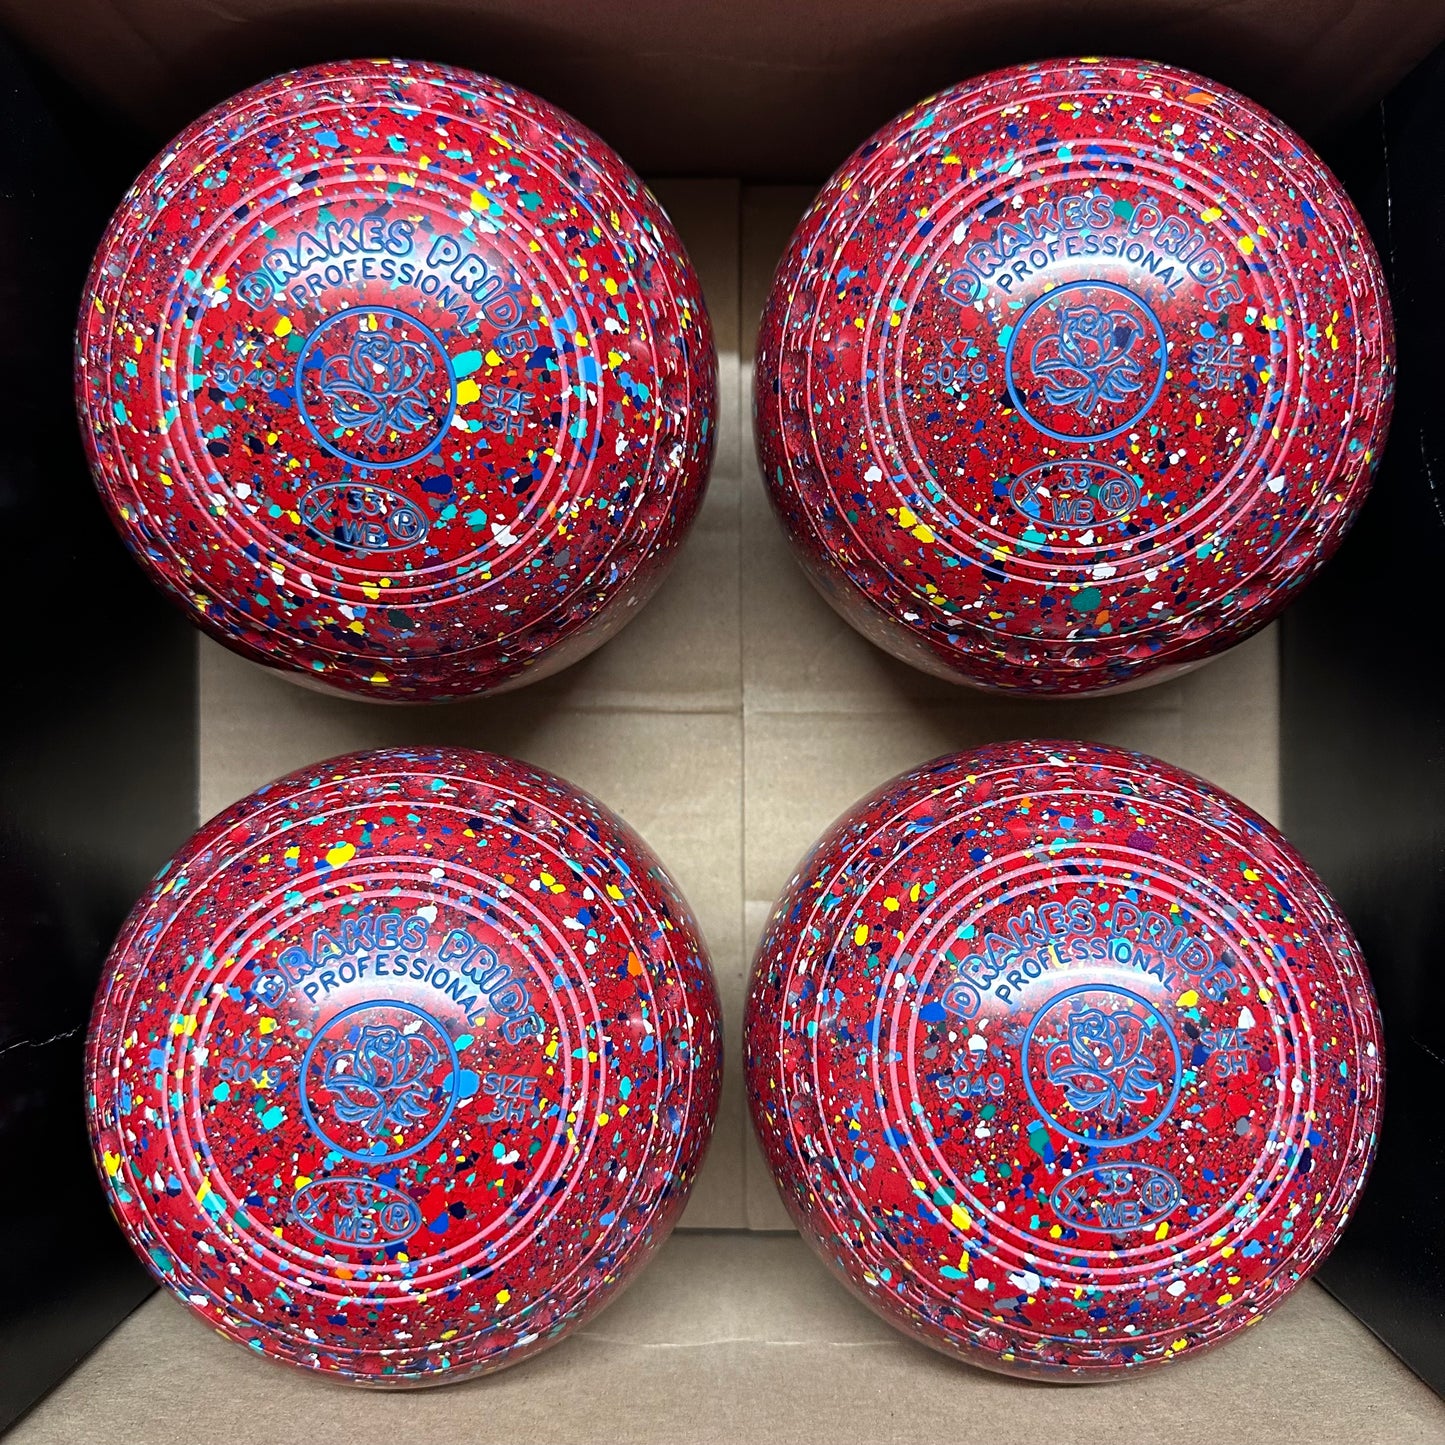 Drakes Pride Professional - Size 3H - Red Harlequin (Blue Rings) - WB33 Stamp